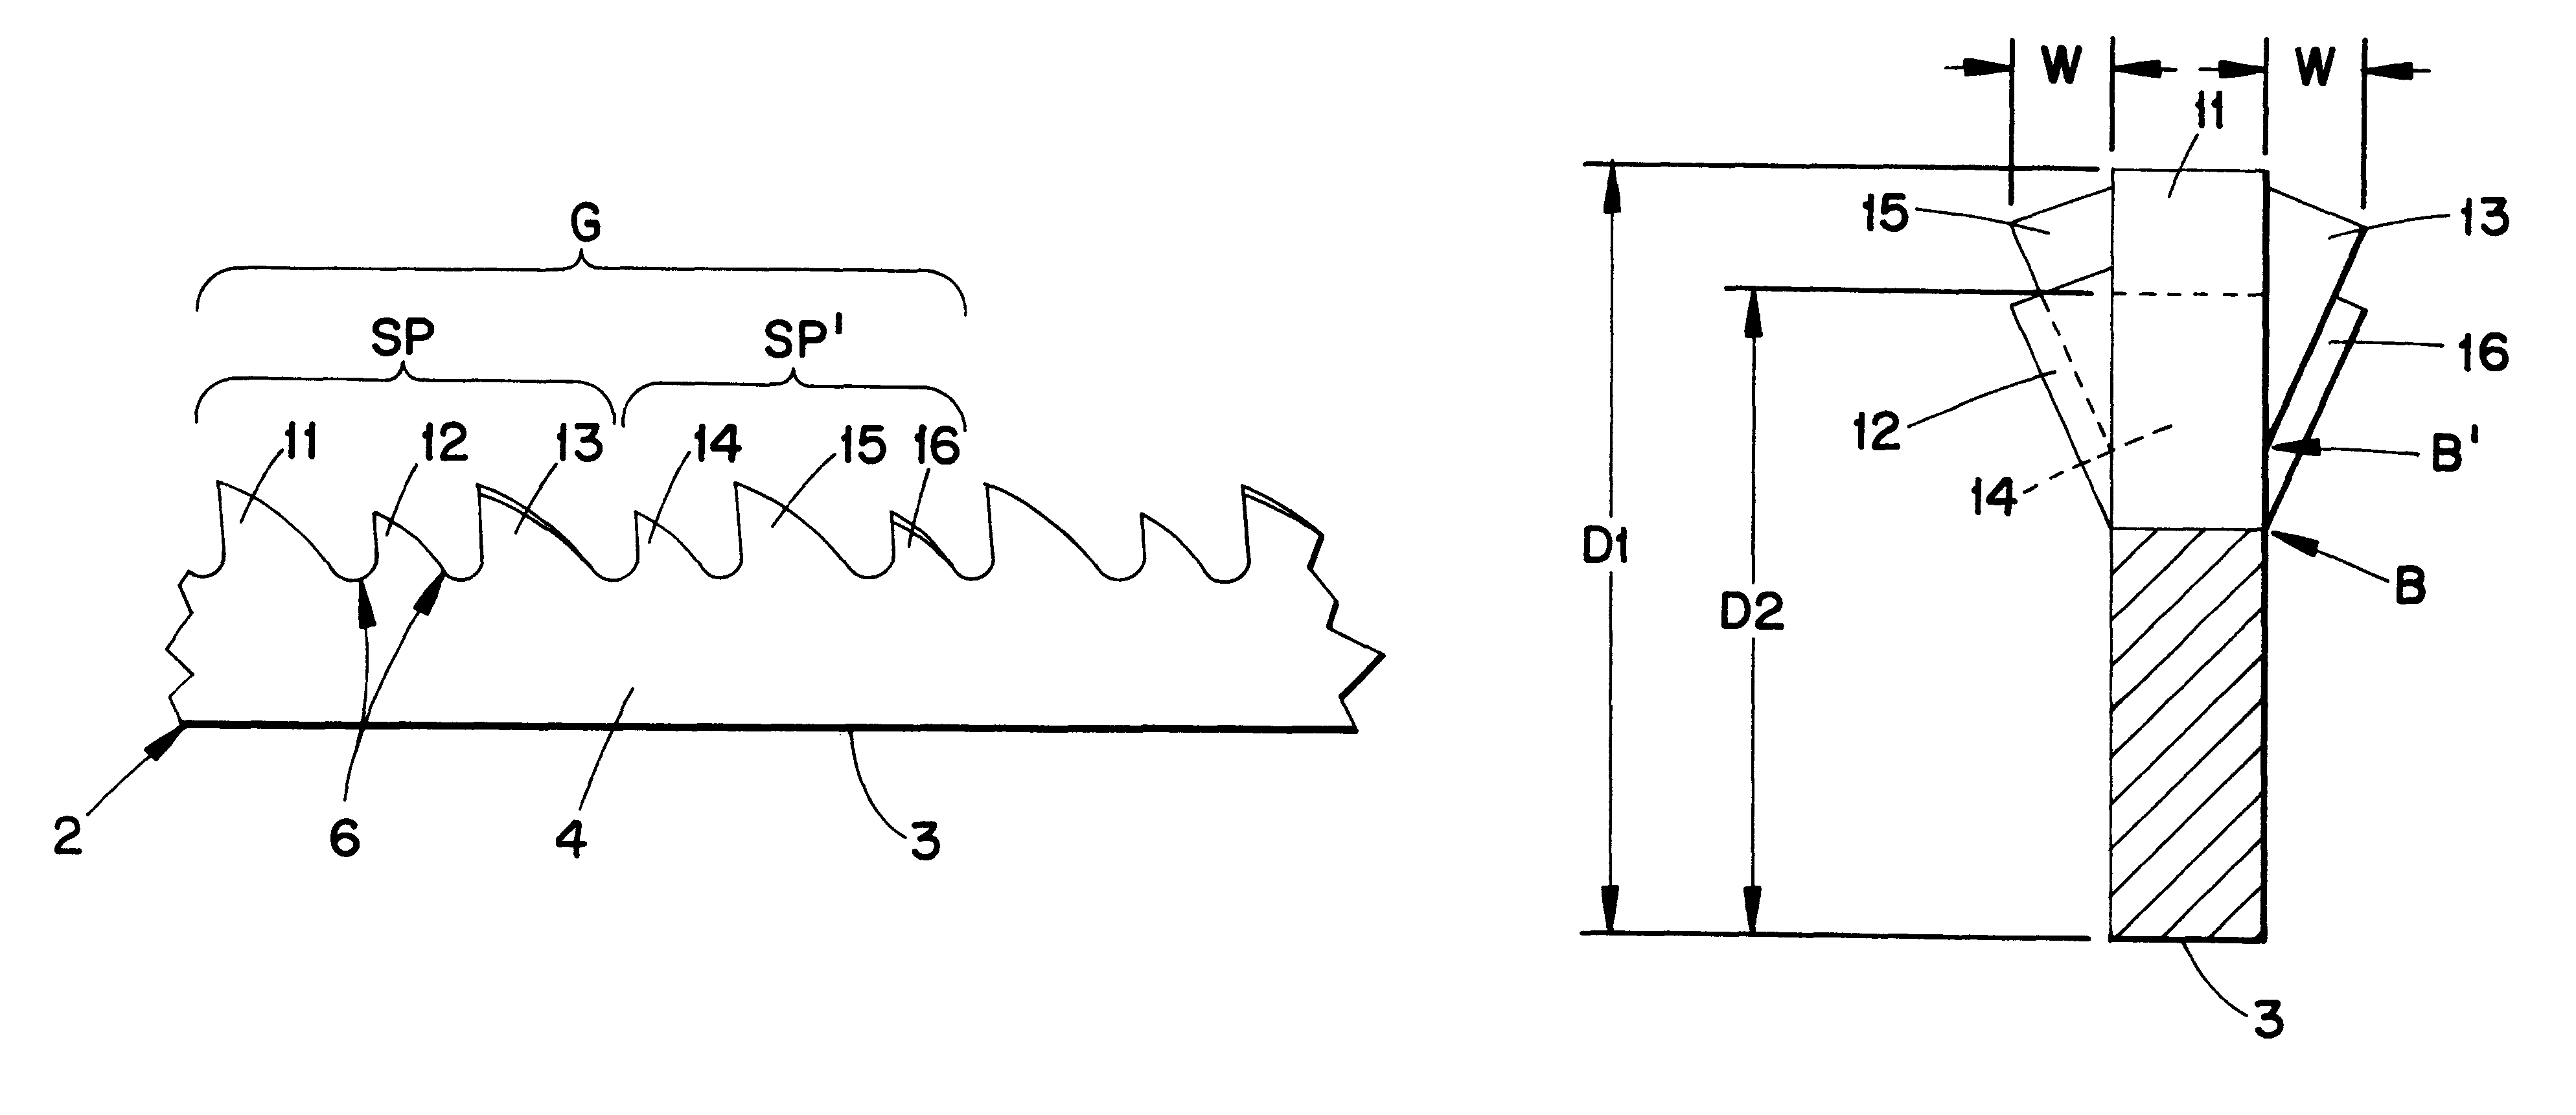 Tooth arrangement in a metal cutting bandsaw